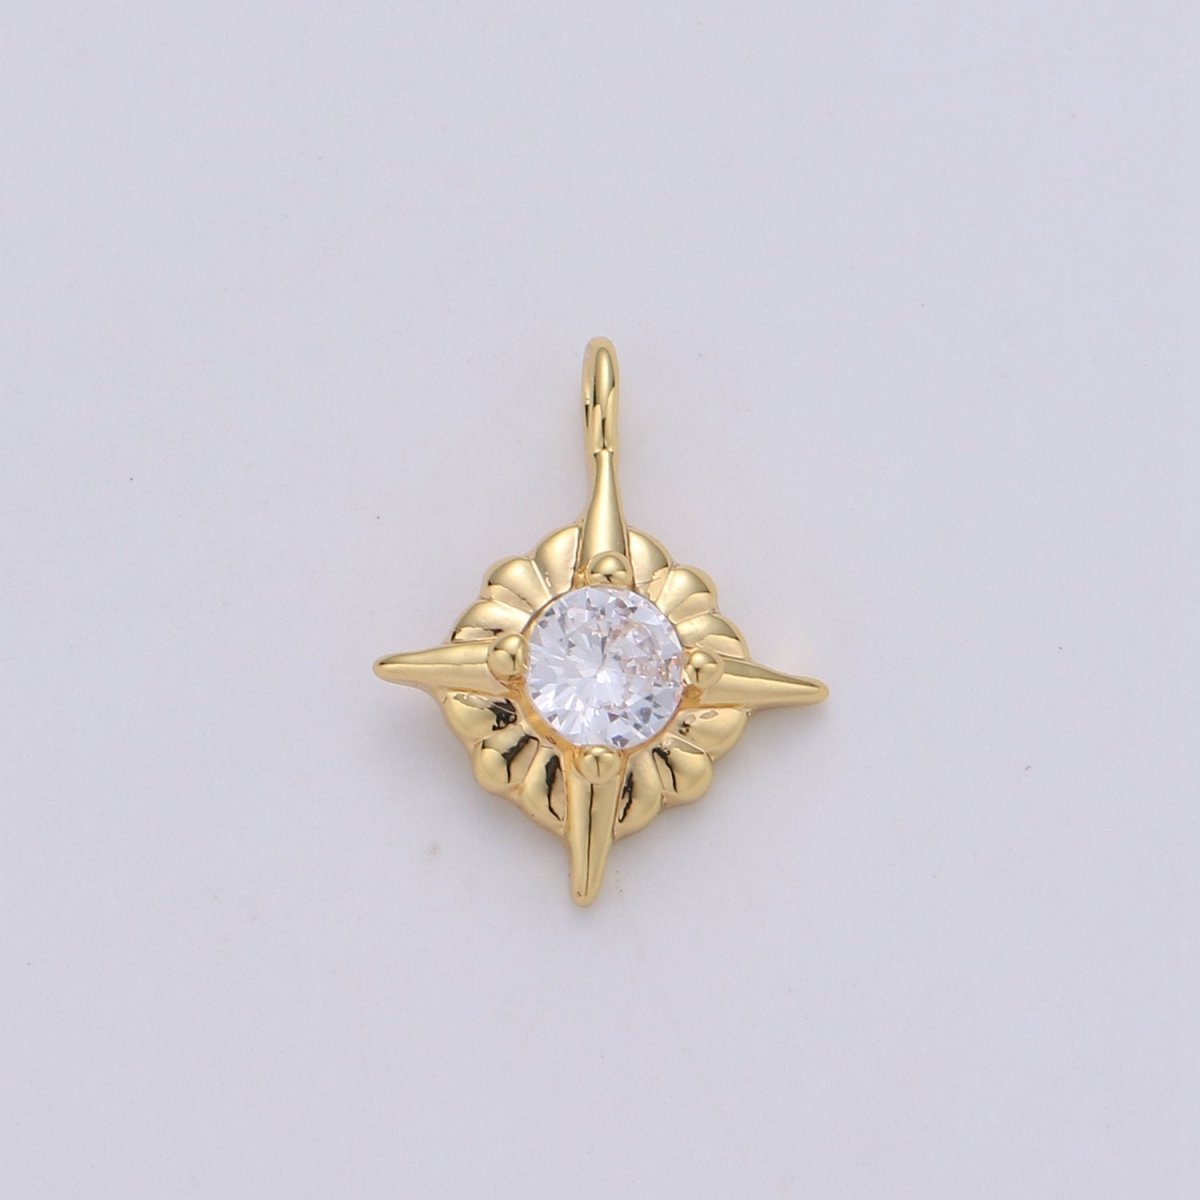 24K Gold Filled Dainty Tiny Sparkling Star Celestial Charm with Micro Pave Cubic Zirconia CZ Stone for Necklace or Bracelet C-890 - DLUXCA